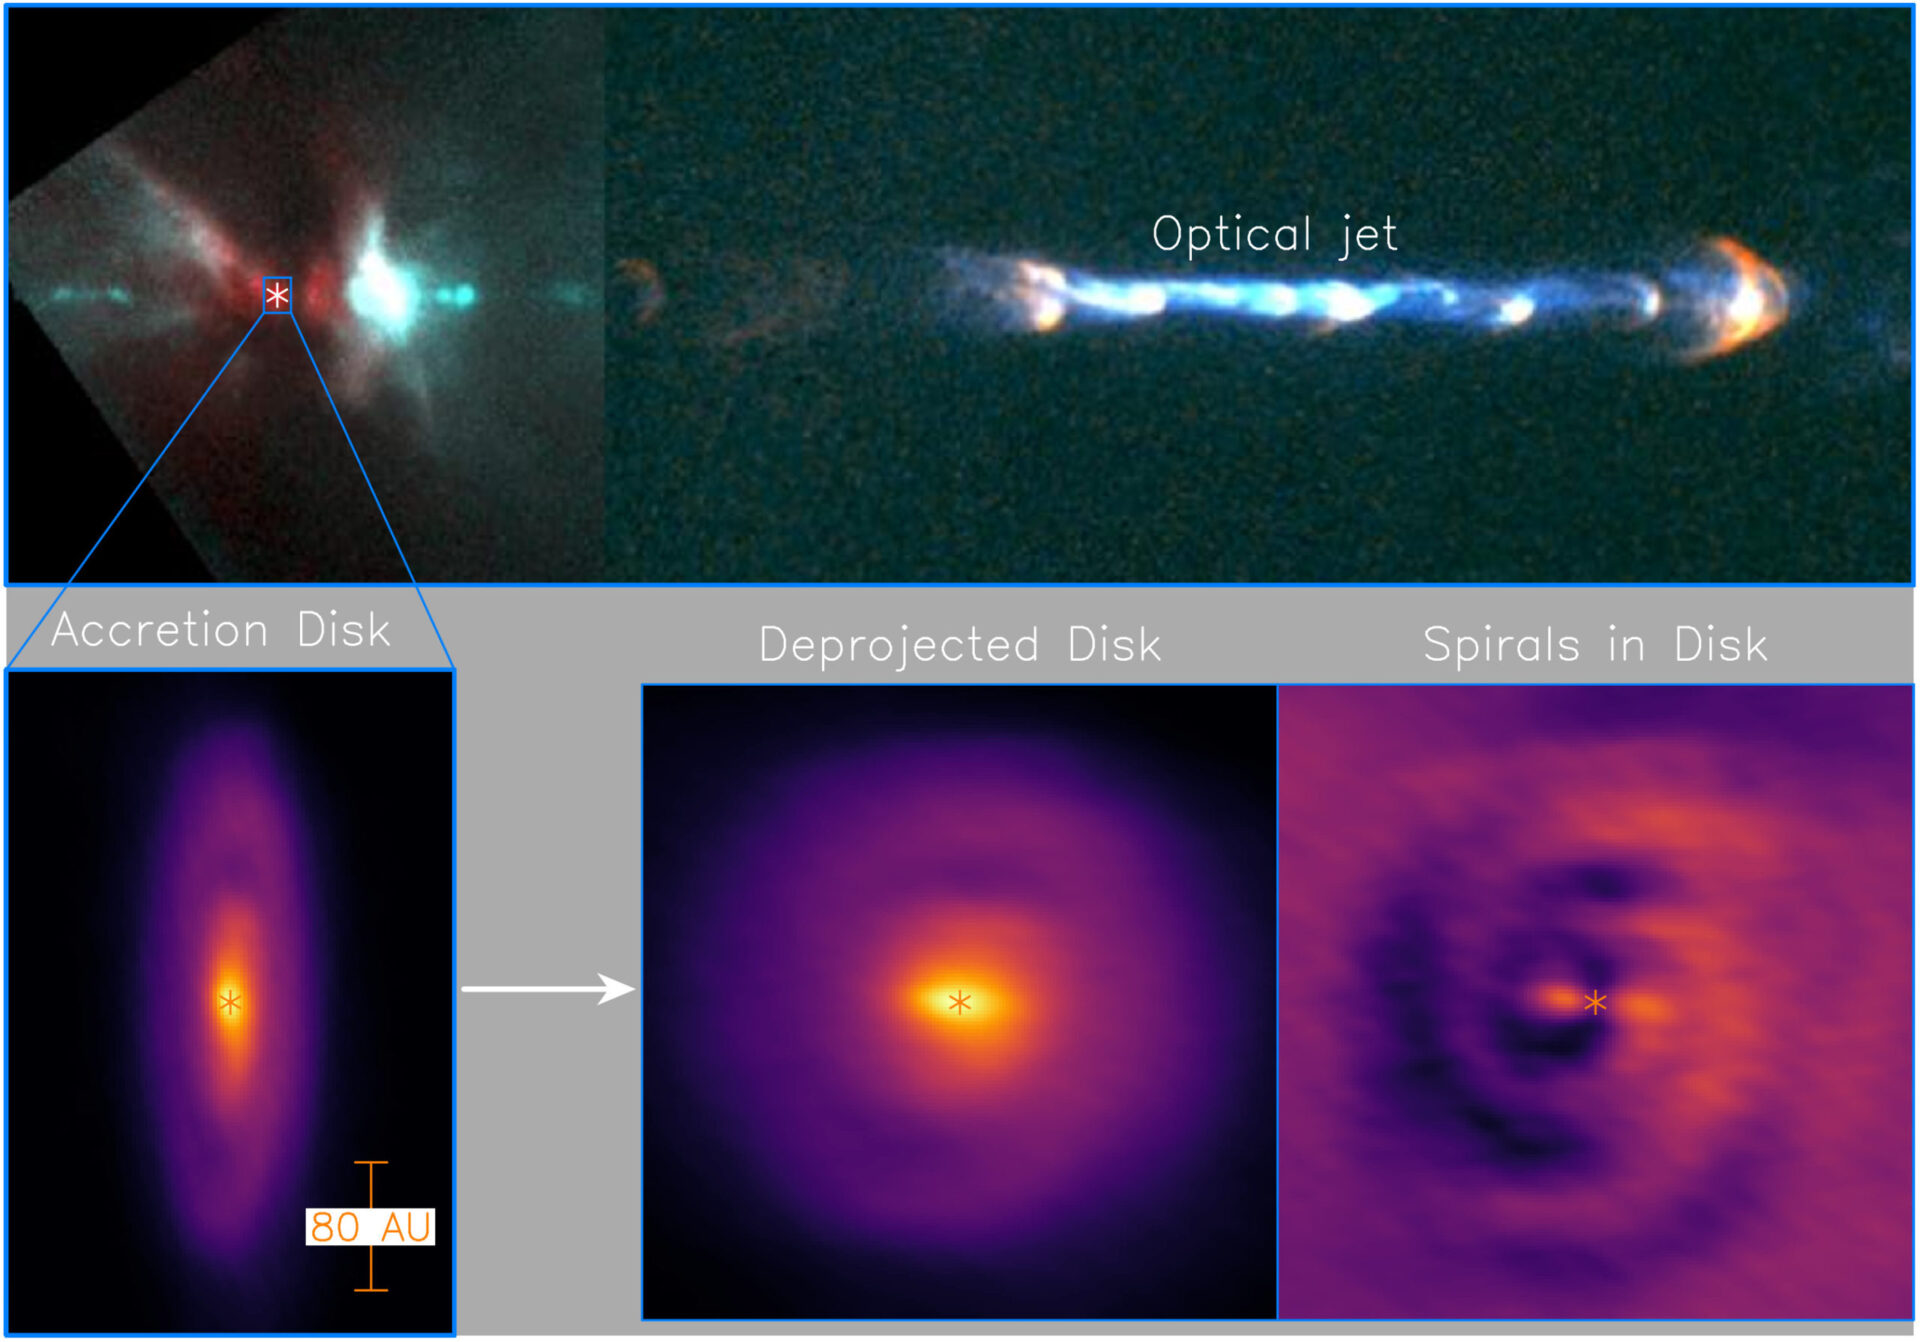 <p>Figure 1: (Top) Optical image of the jet in the HH 111 protostellar system taken by the Hubble Space Telescope (Reipurth et al. 1999). (Bottom left) Accretion disk detected with ALMA in dust continuum emission at 850 micron. (Bottom middle) The disk turned (de-projected) to be face-on, showing a pair of faint spirals. (Bottom right) Annularly averaged continuum emission is subtracted to highlight the faint spirals in the disk. Credit: ALMA (ESO/NAOJ/NRAO)/Lee et al.</p>
